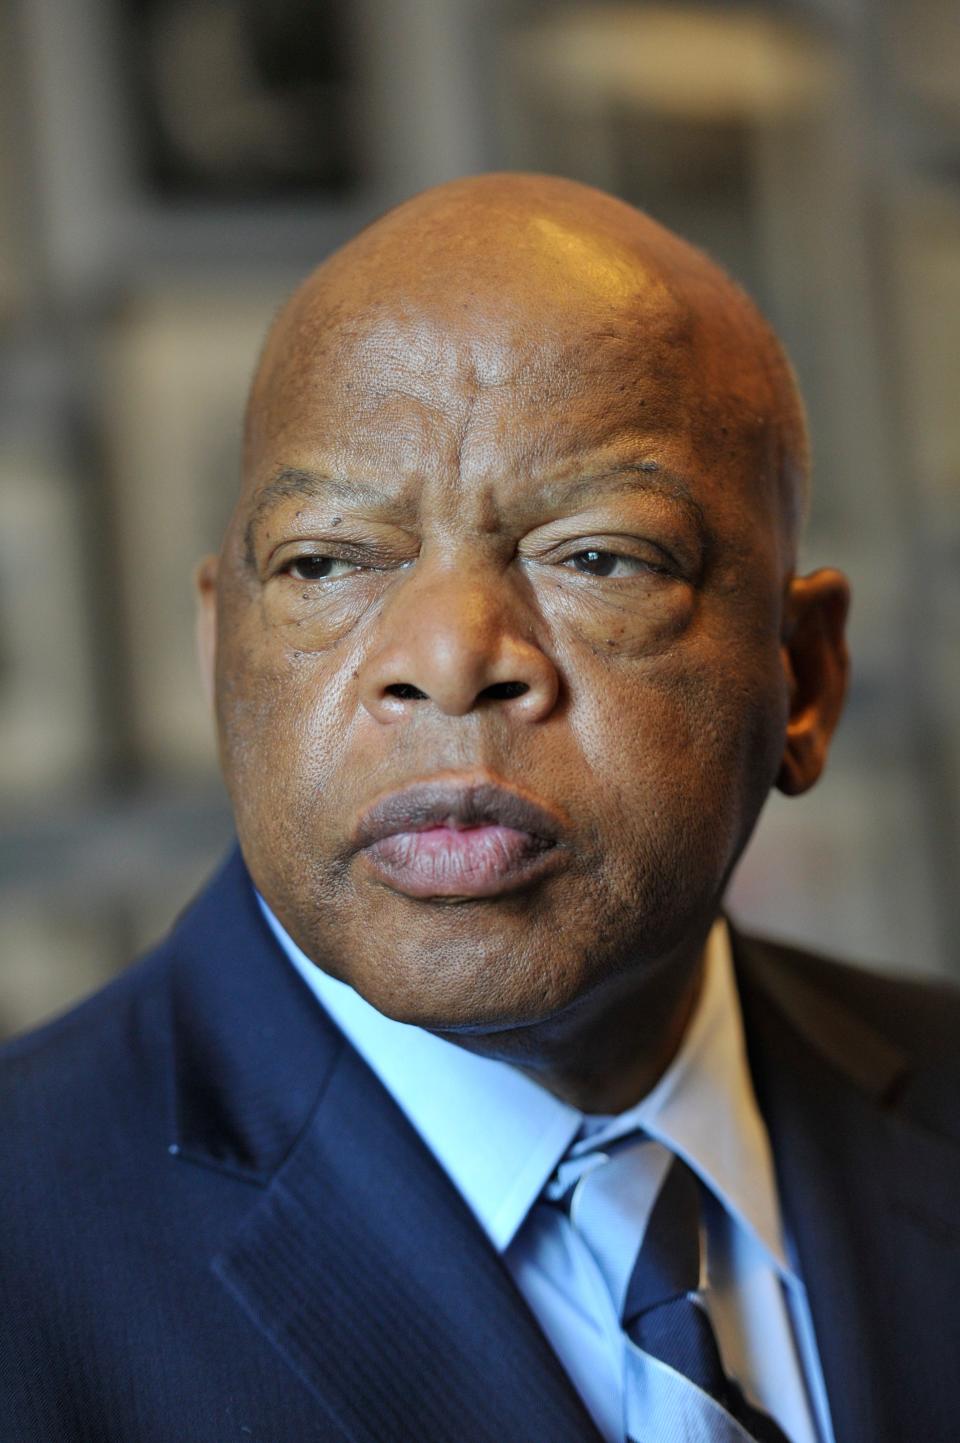 Rep. John Lewis, D-Ga., poses in his office in the Cannon Building in Washington, DC on July 20, 2012.  Lewis, a former Freedom Rider and the last surviving major organizer of the March on Washington.